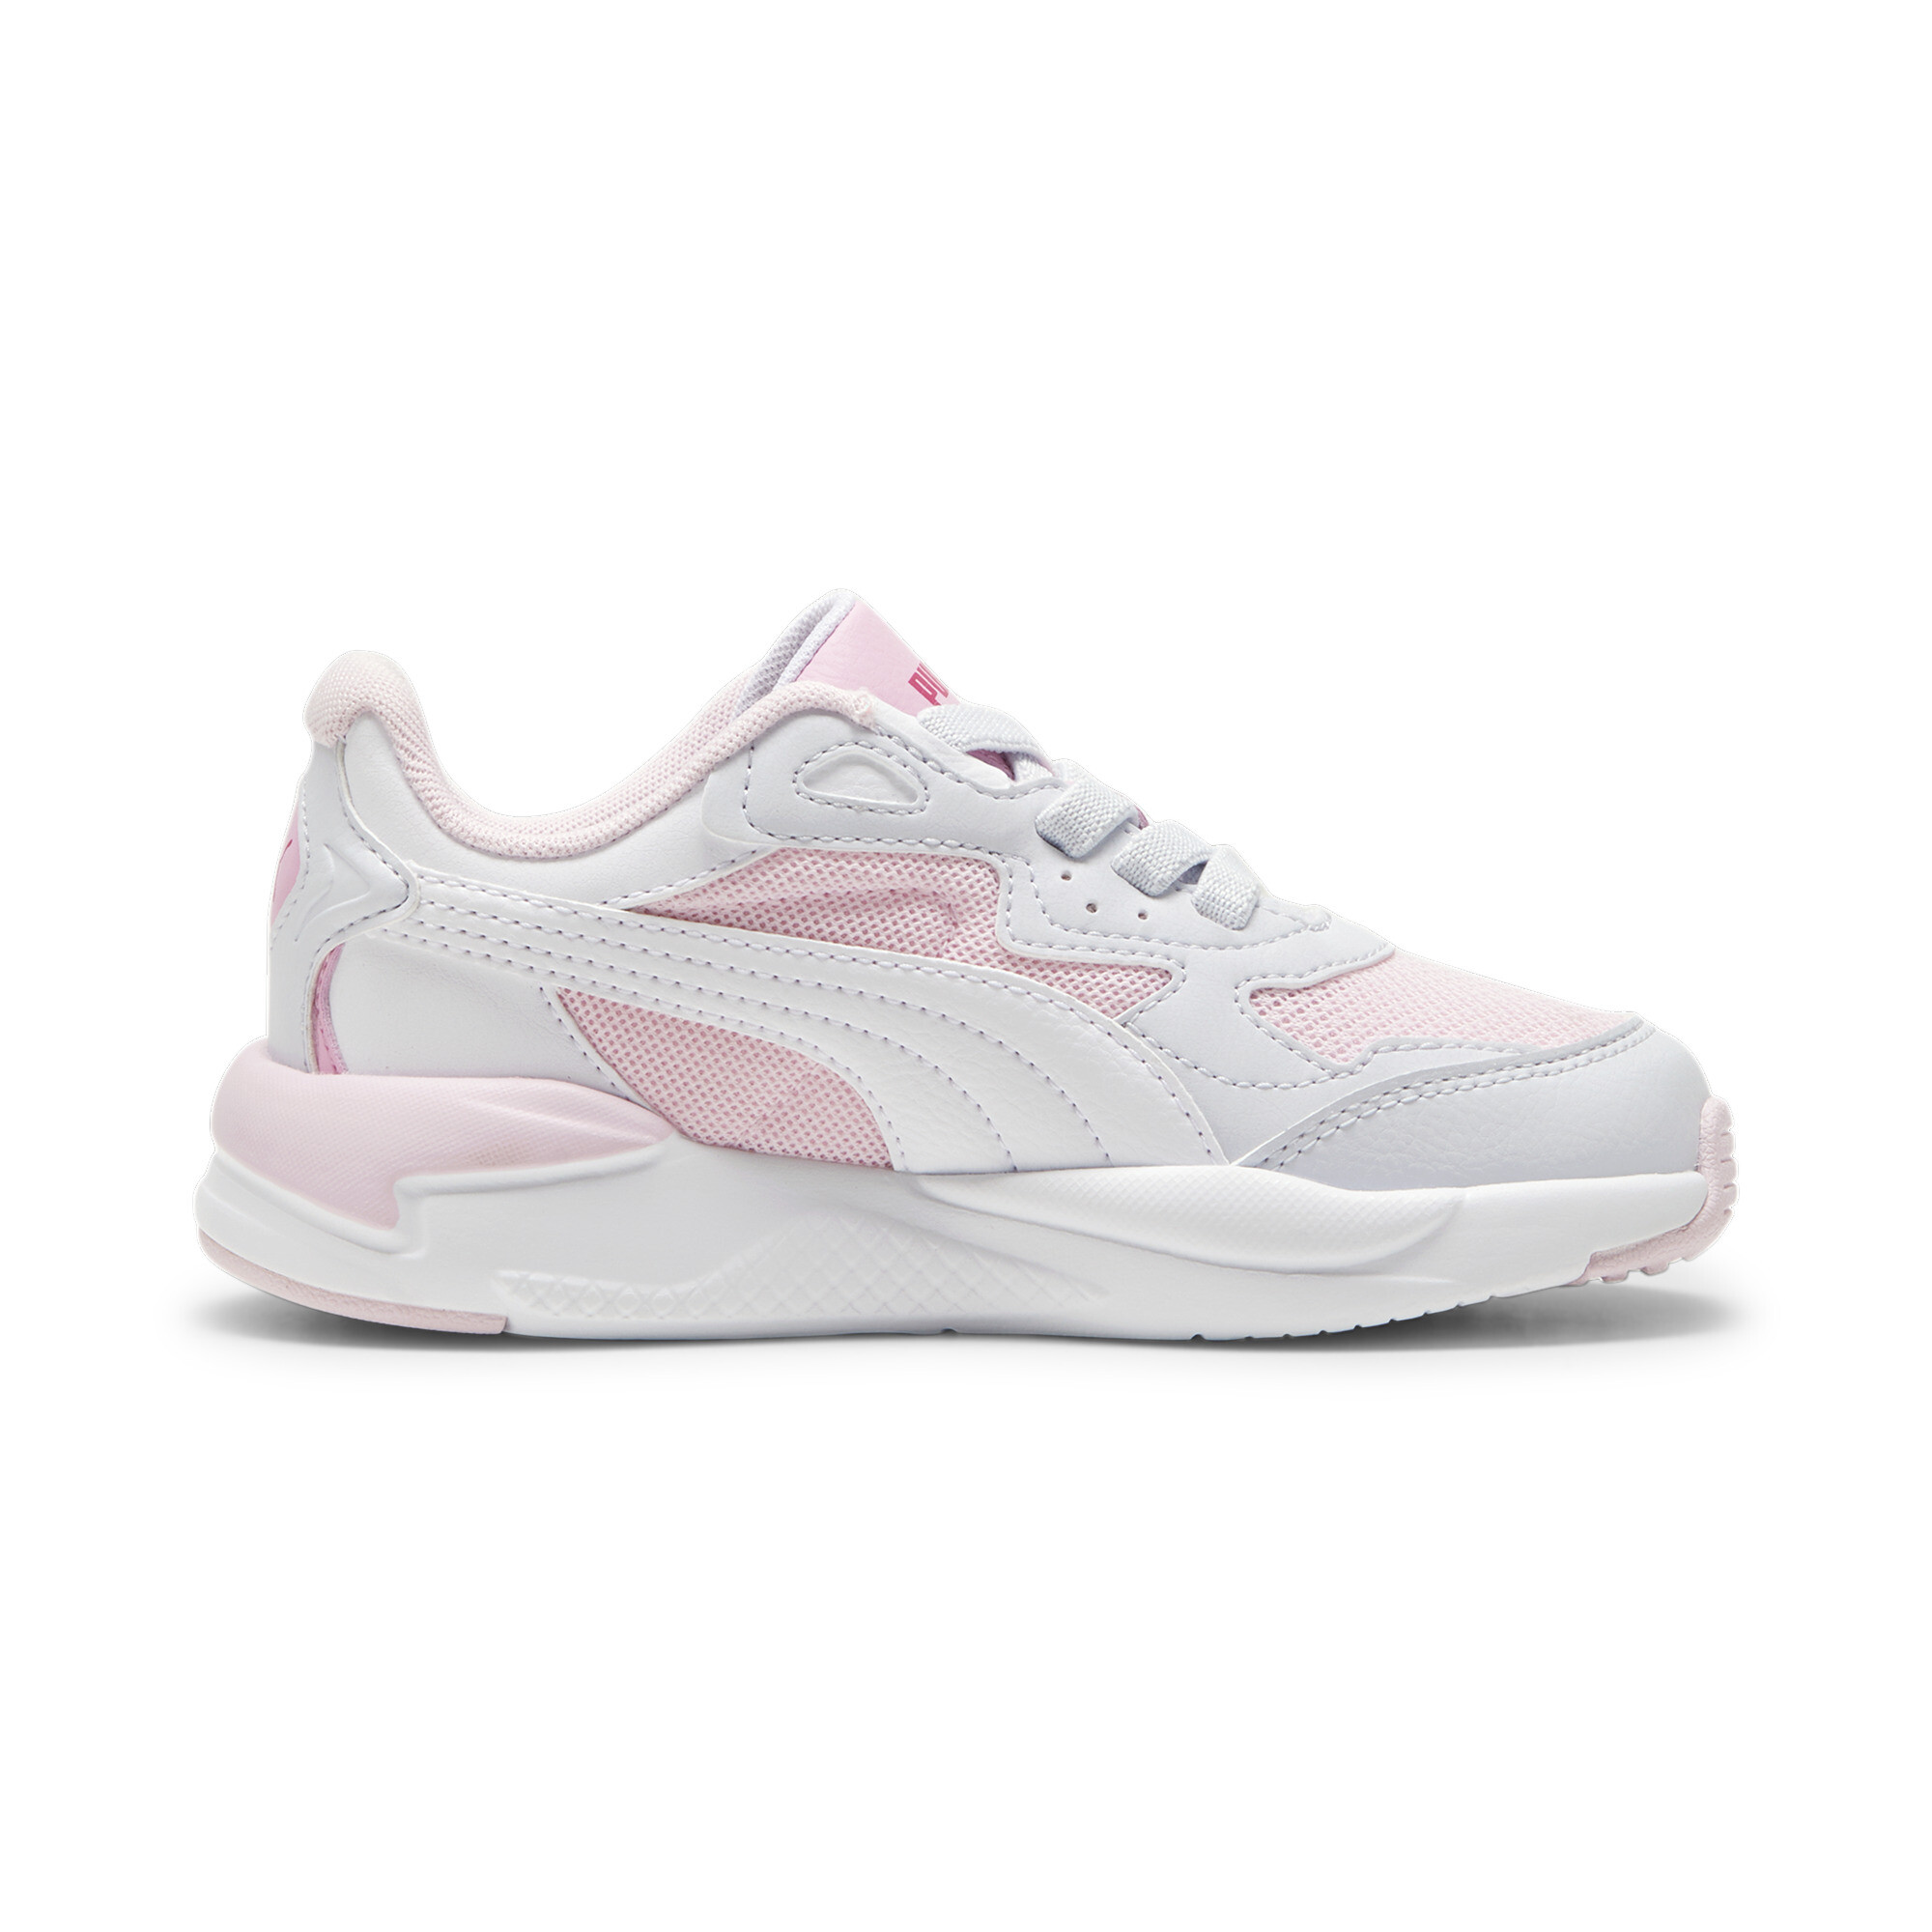 Puma X-Ray Speed AC Kids' Trainers, Pink, Size 34.5, Shoes